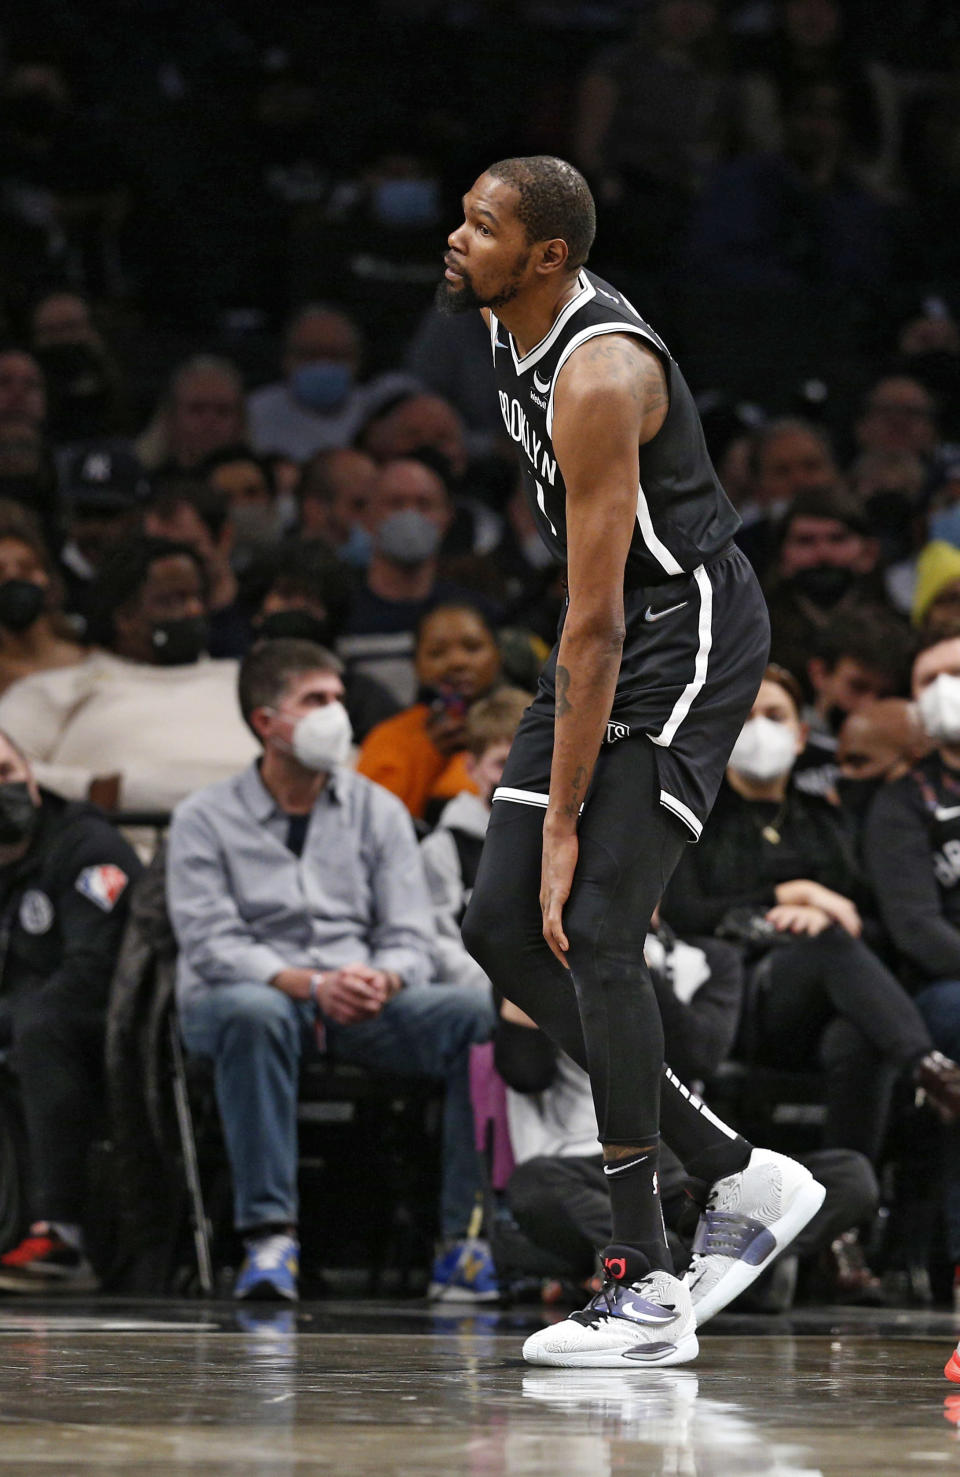 Brooklyn Nets forward Kevin Durant (7) grabs his knee after a collision against the New Orleans Pelicans during the first half of an NBA basketball game, Saturday, Jan. 15, 2022 in New York. (AP Photo/Noah K. Murray)